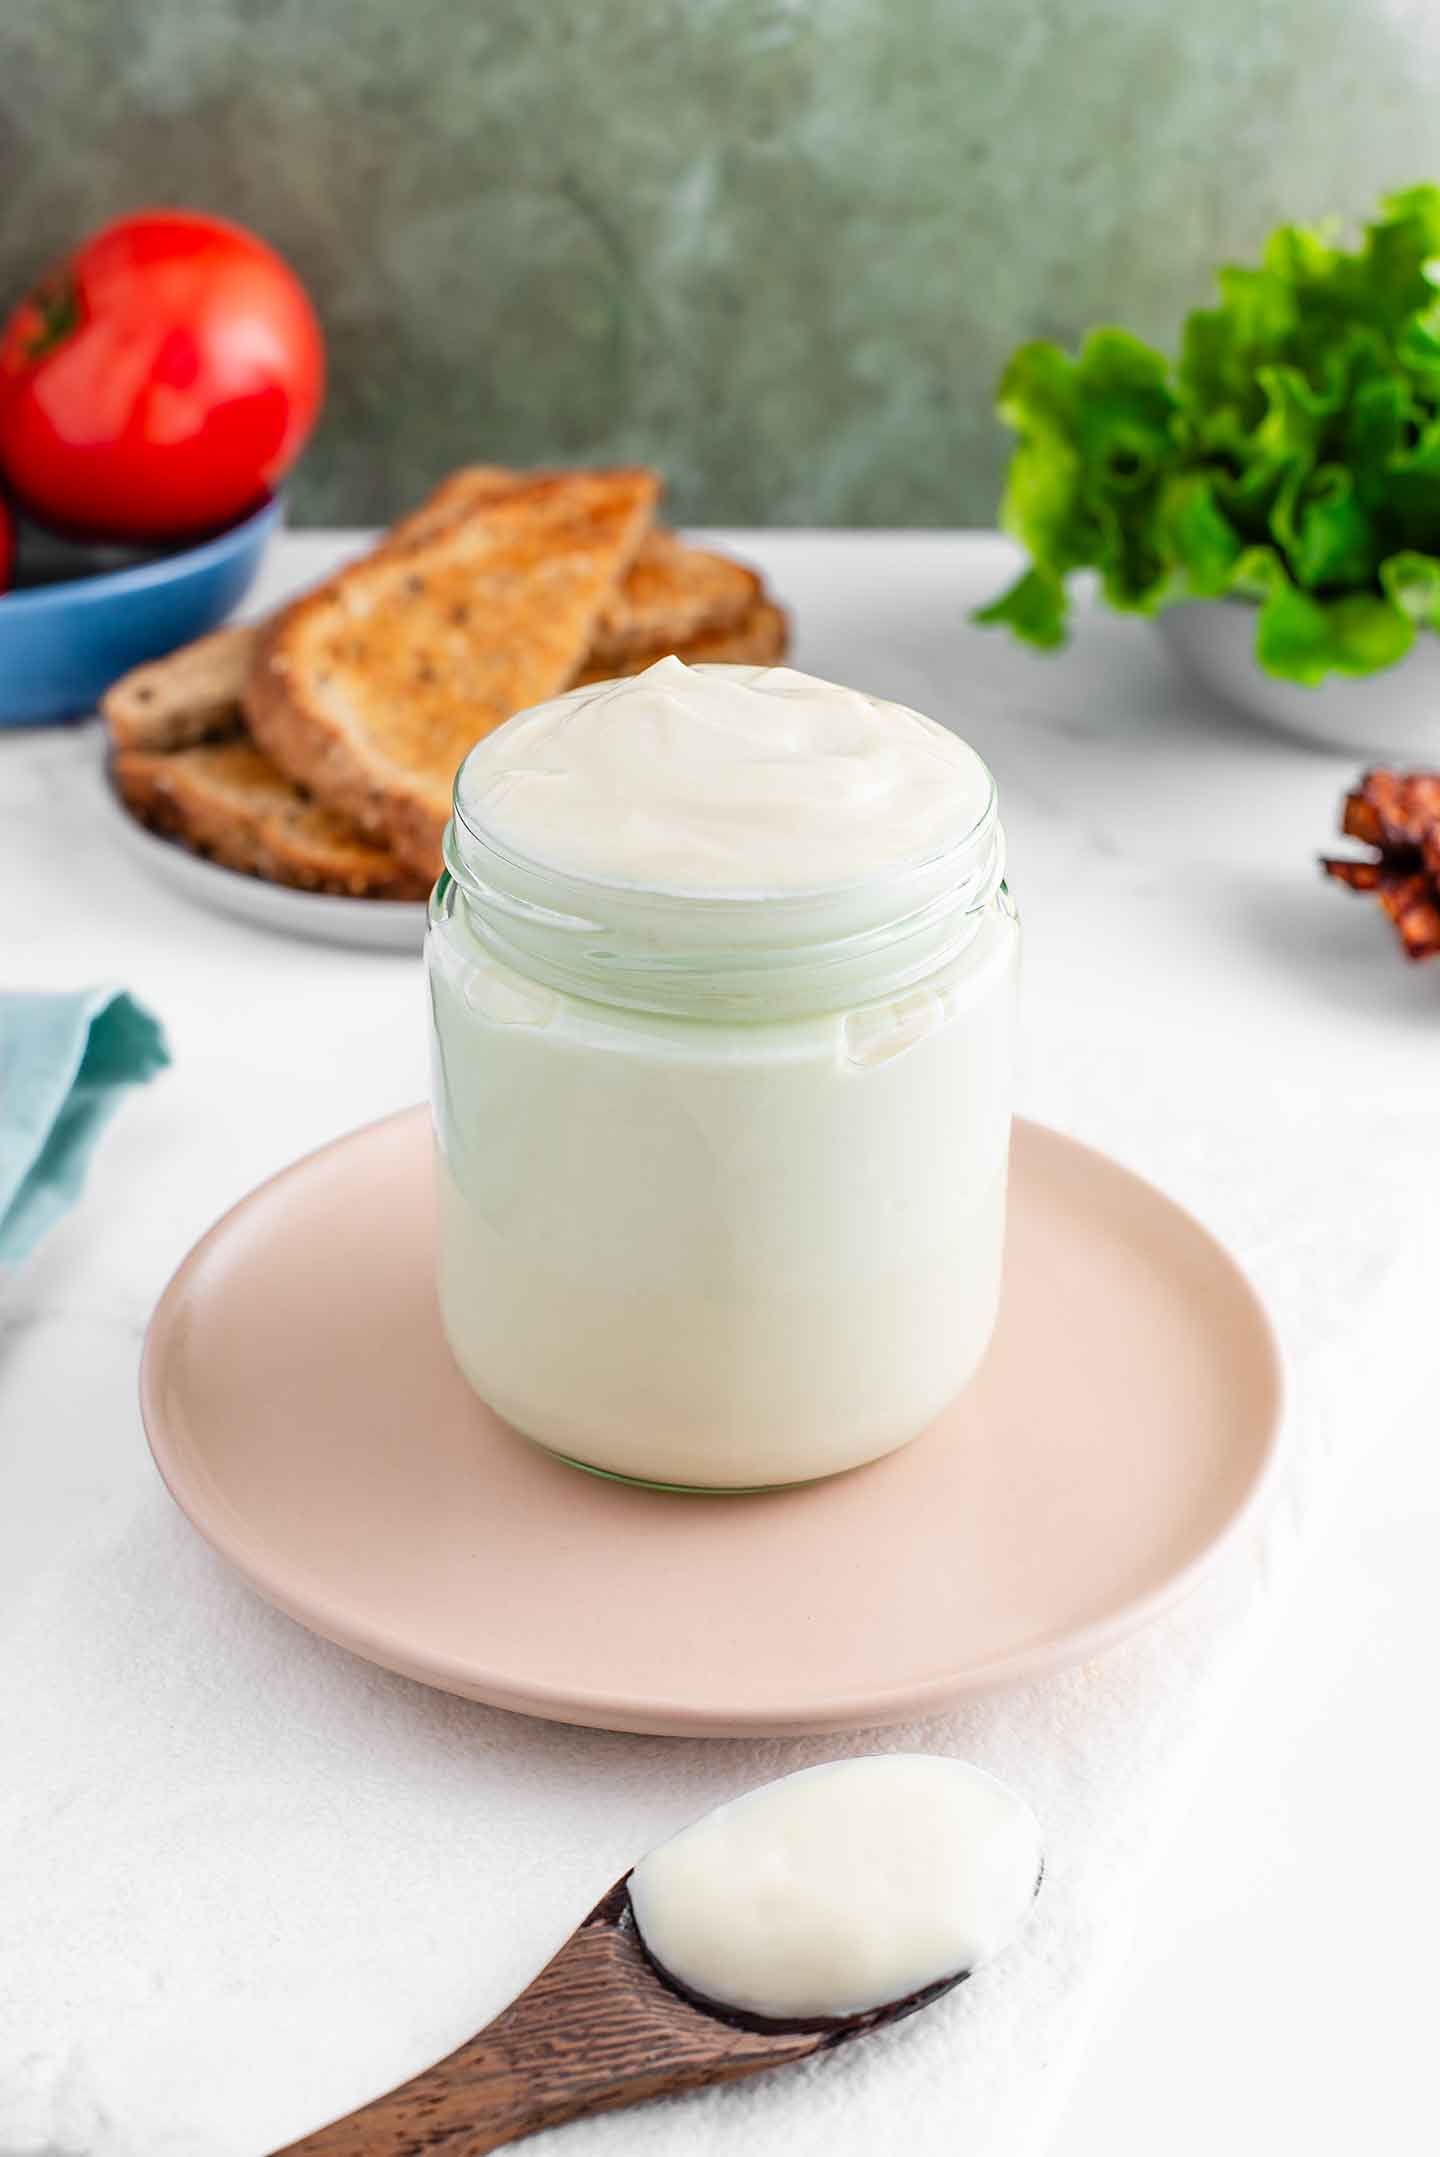 Side view of oil-free mayonnaise filling a jar. The mayo is thick and creamy white in colour. A spoonful of thick mayo rests in front of the jar and sandwich ingredients fill the background.